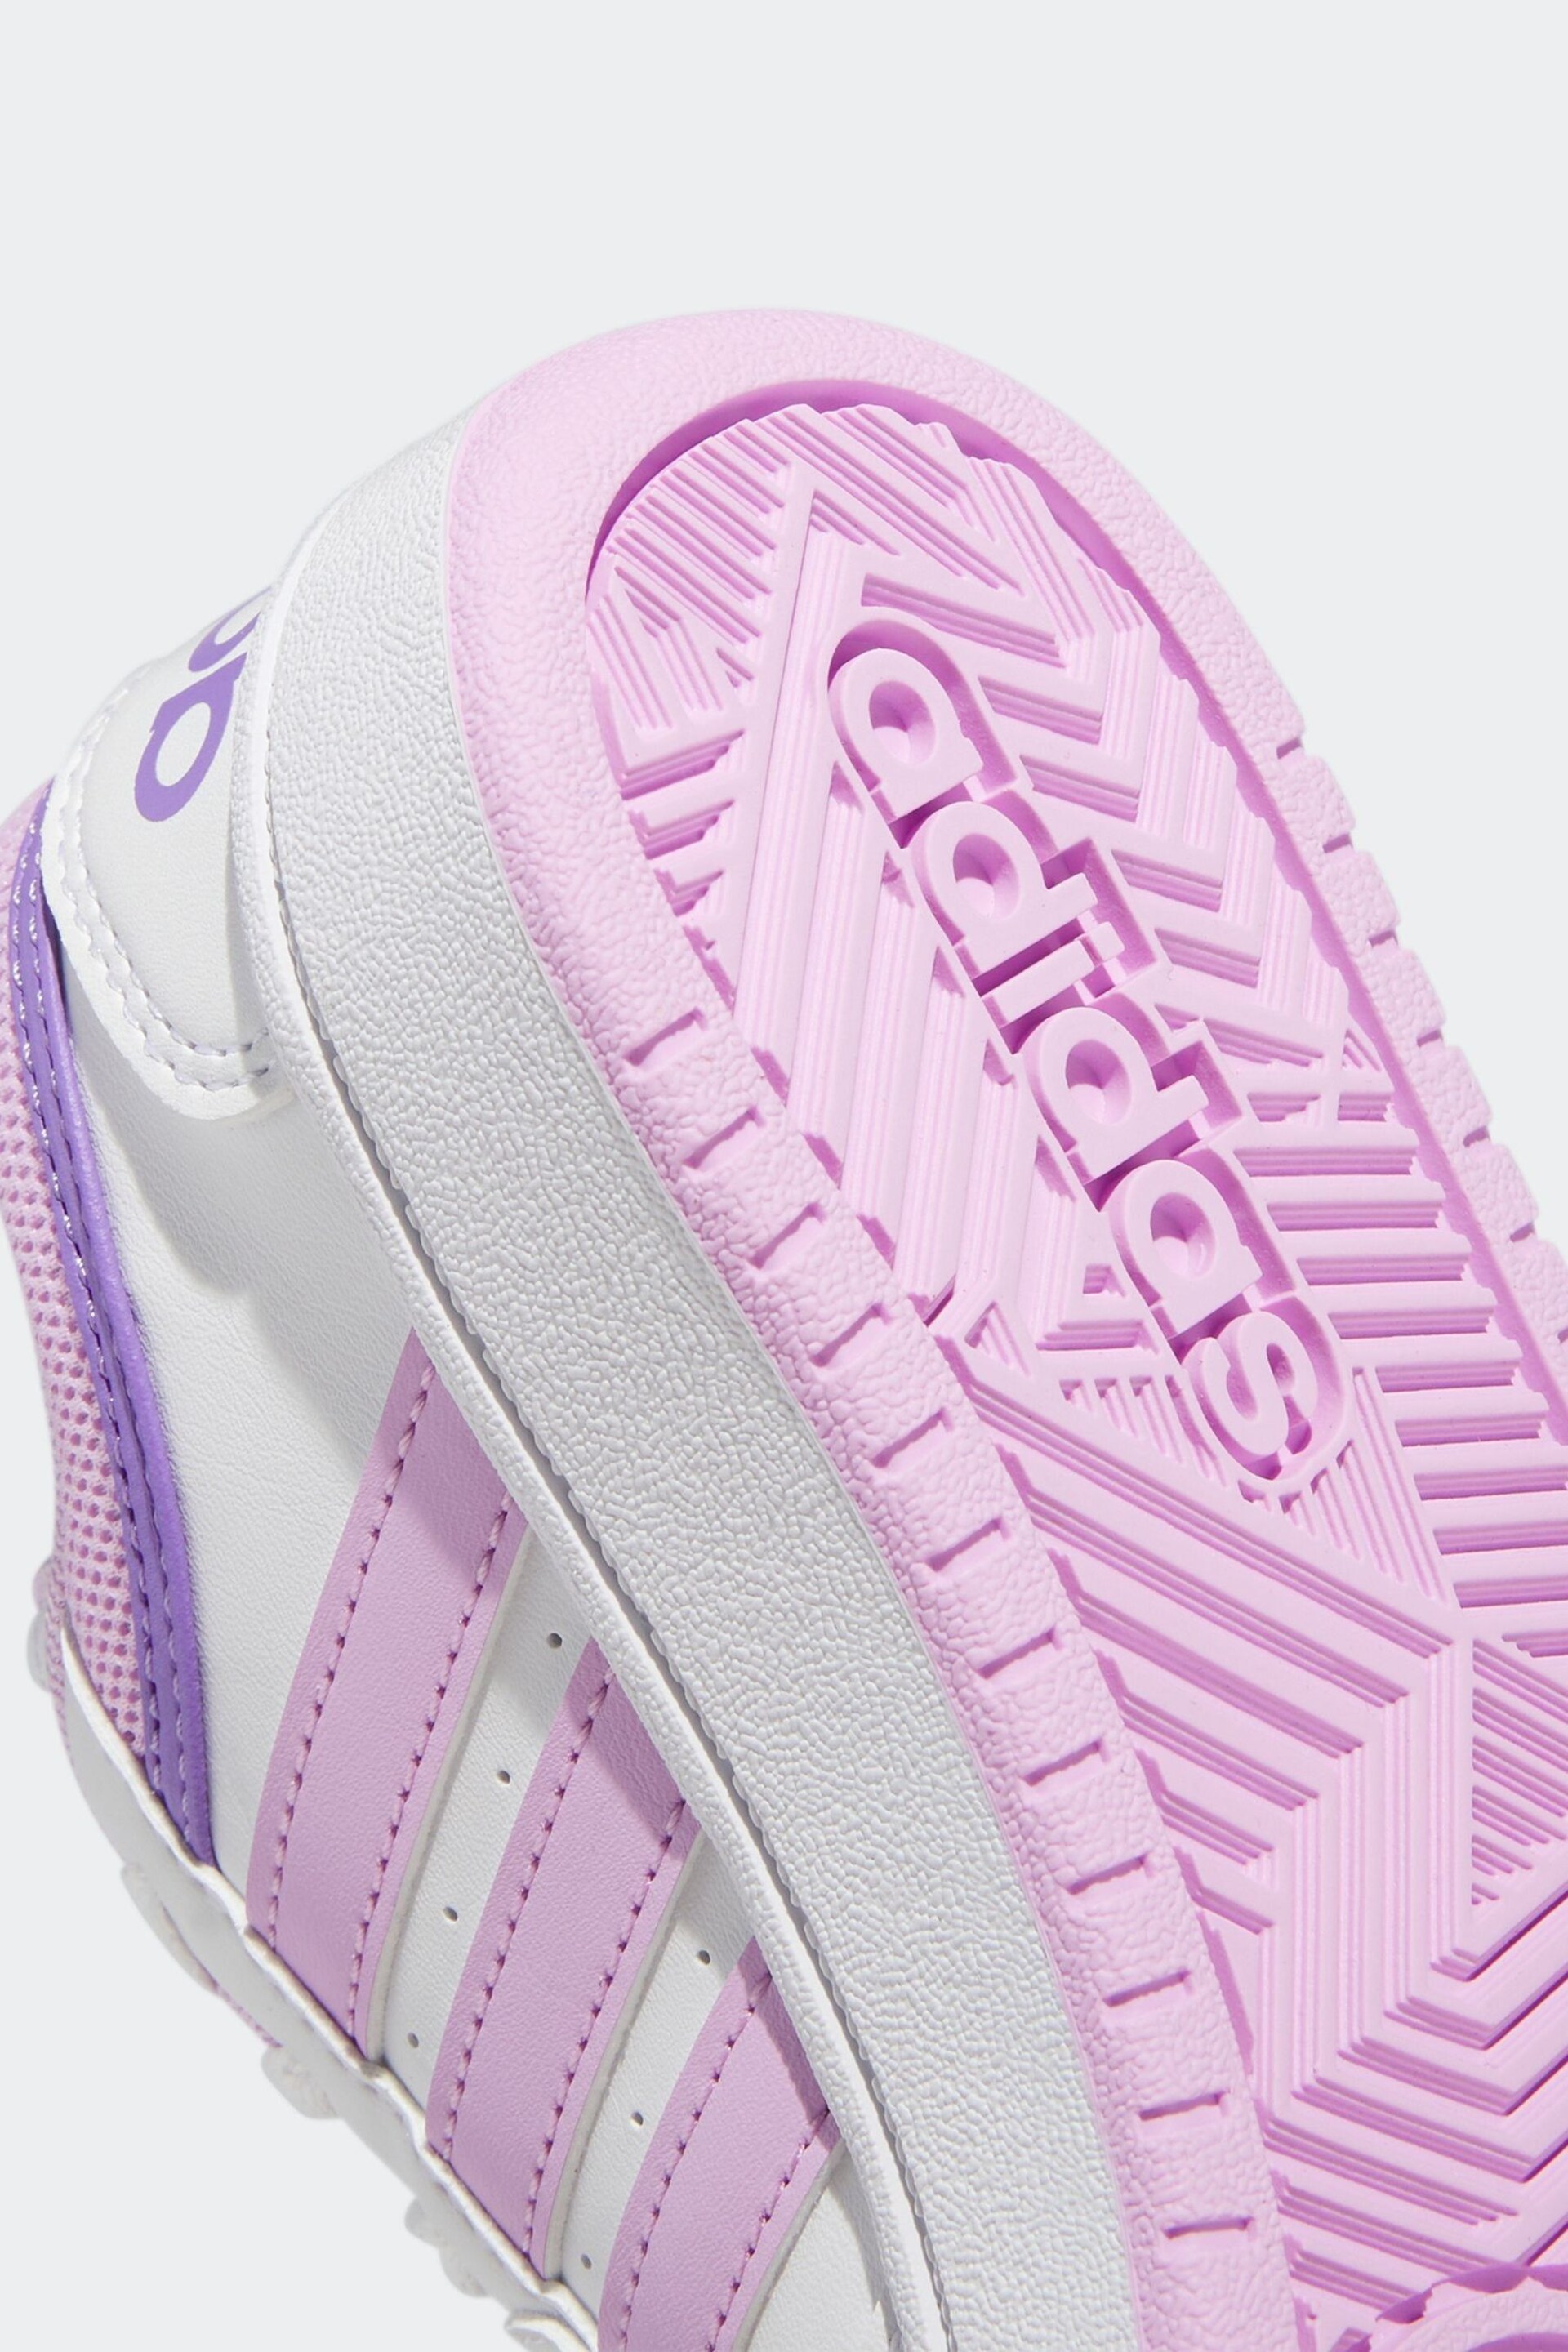 adidas White/purple Hoops Trainers - Image 9 of 9